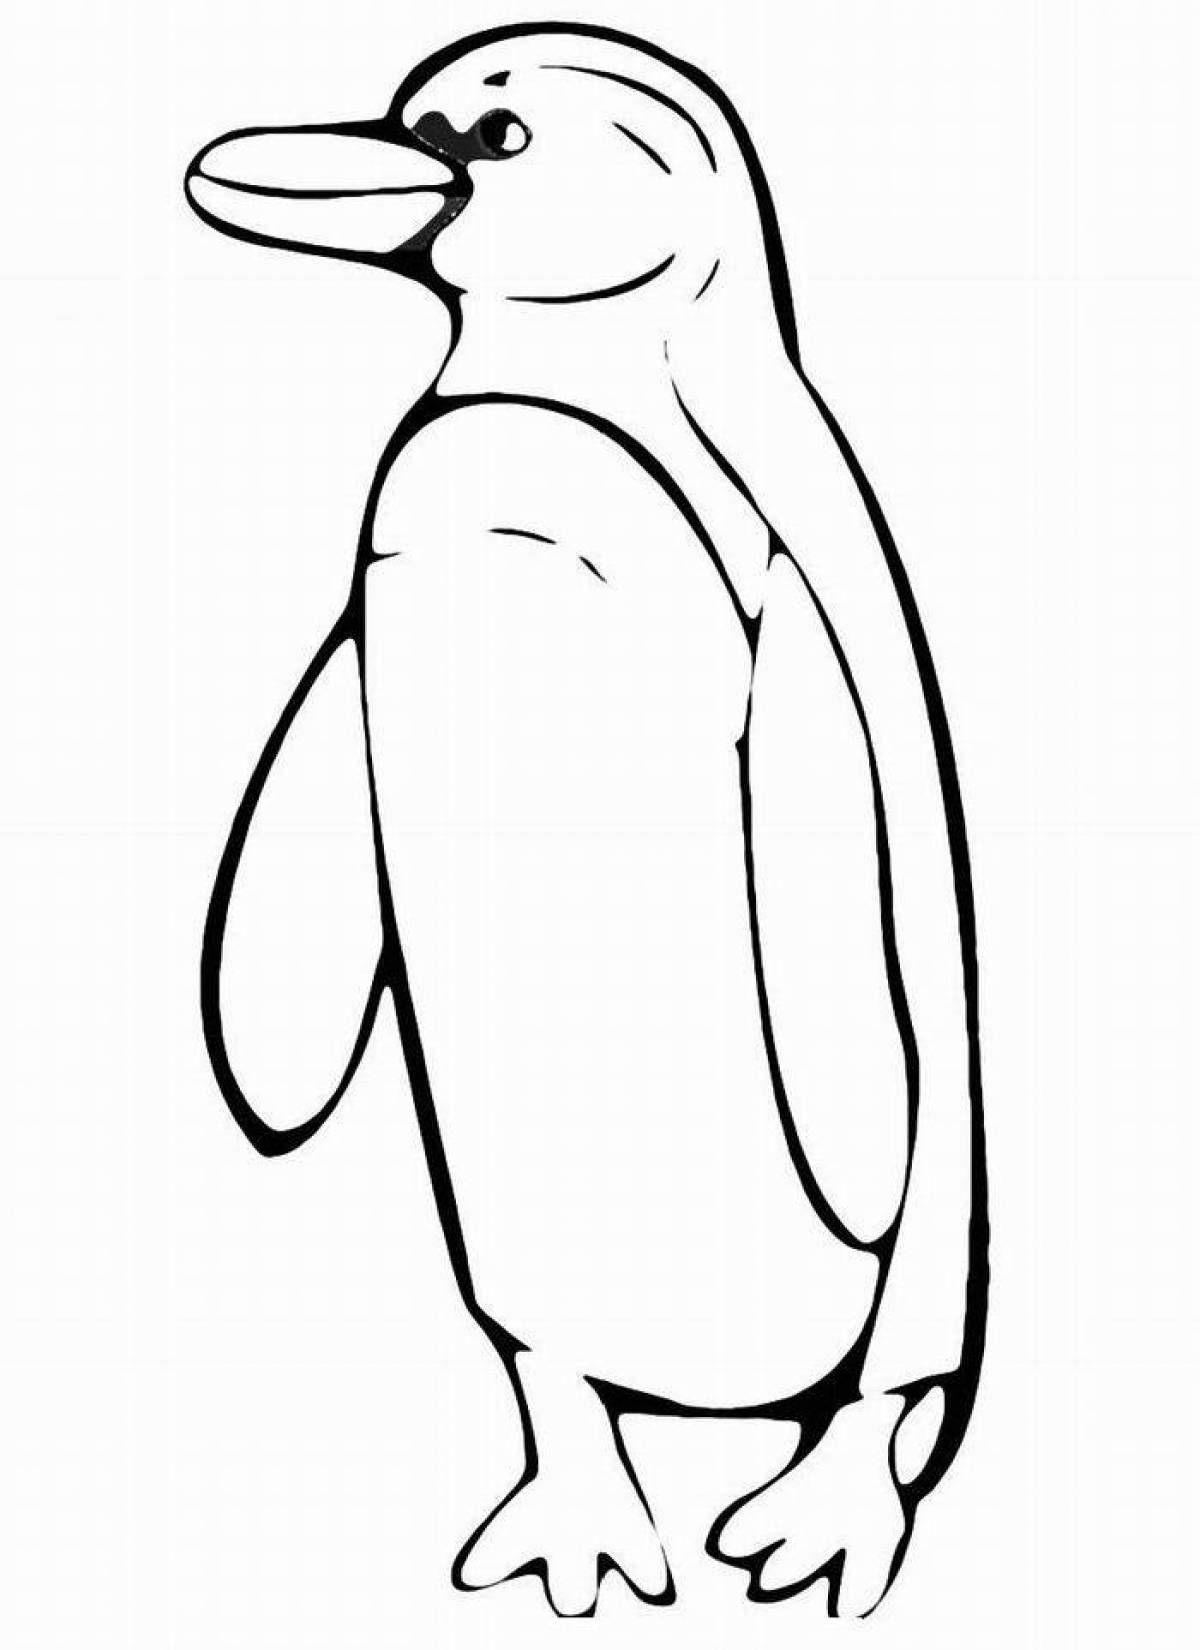 Fabulous penguins coloring pages for kids